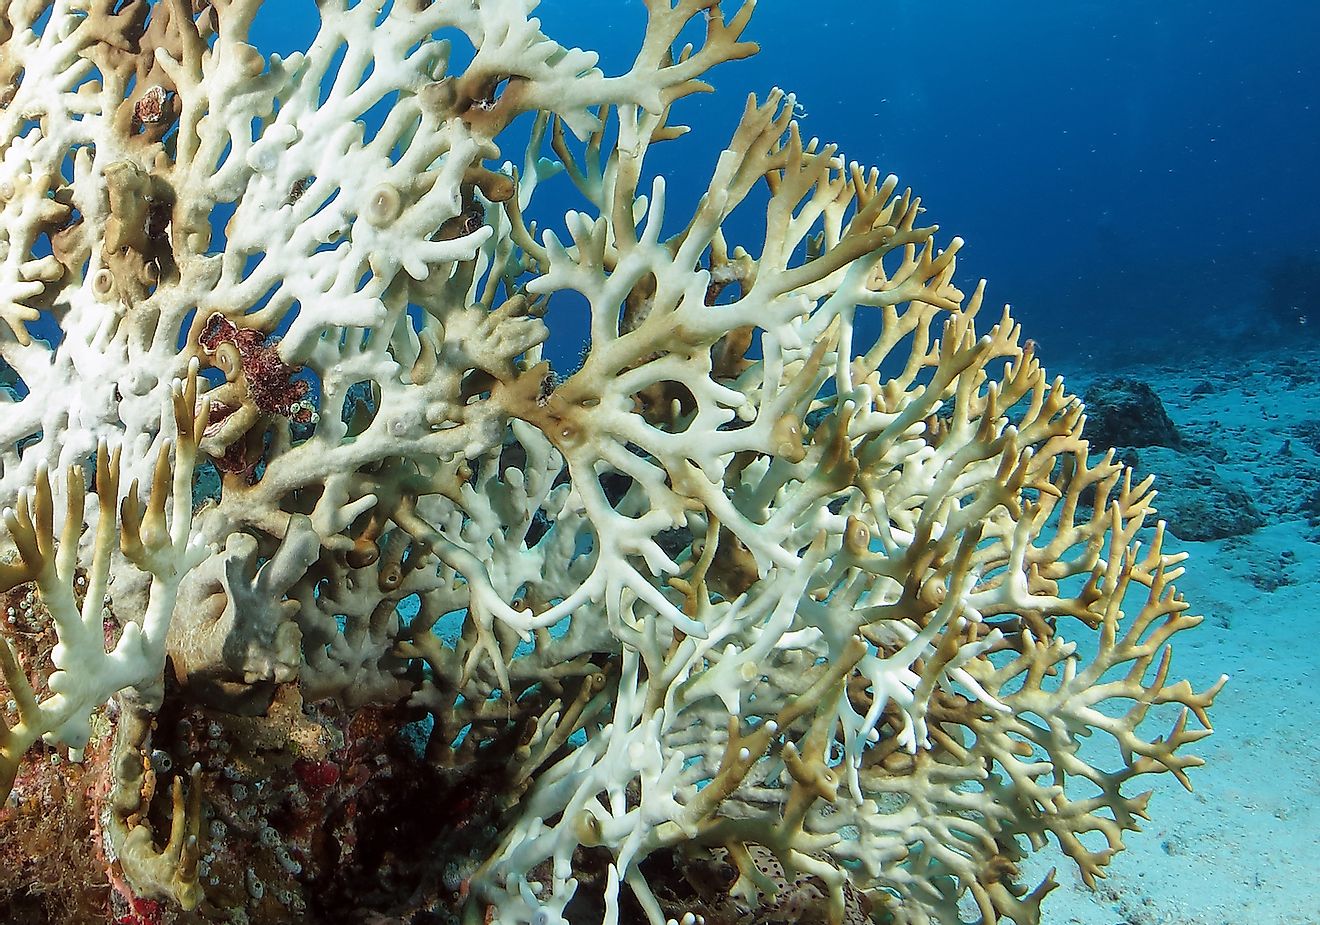 Coral Bleaching under water due to ocean acidification. Image credit: buttchi 3 Sha Life/Shutterstock.com